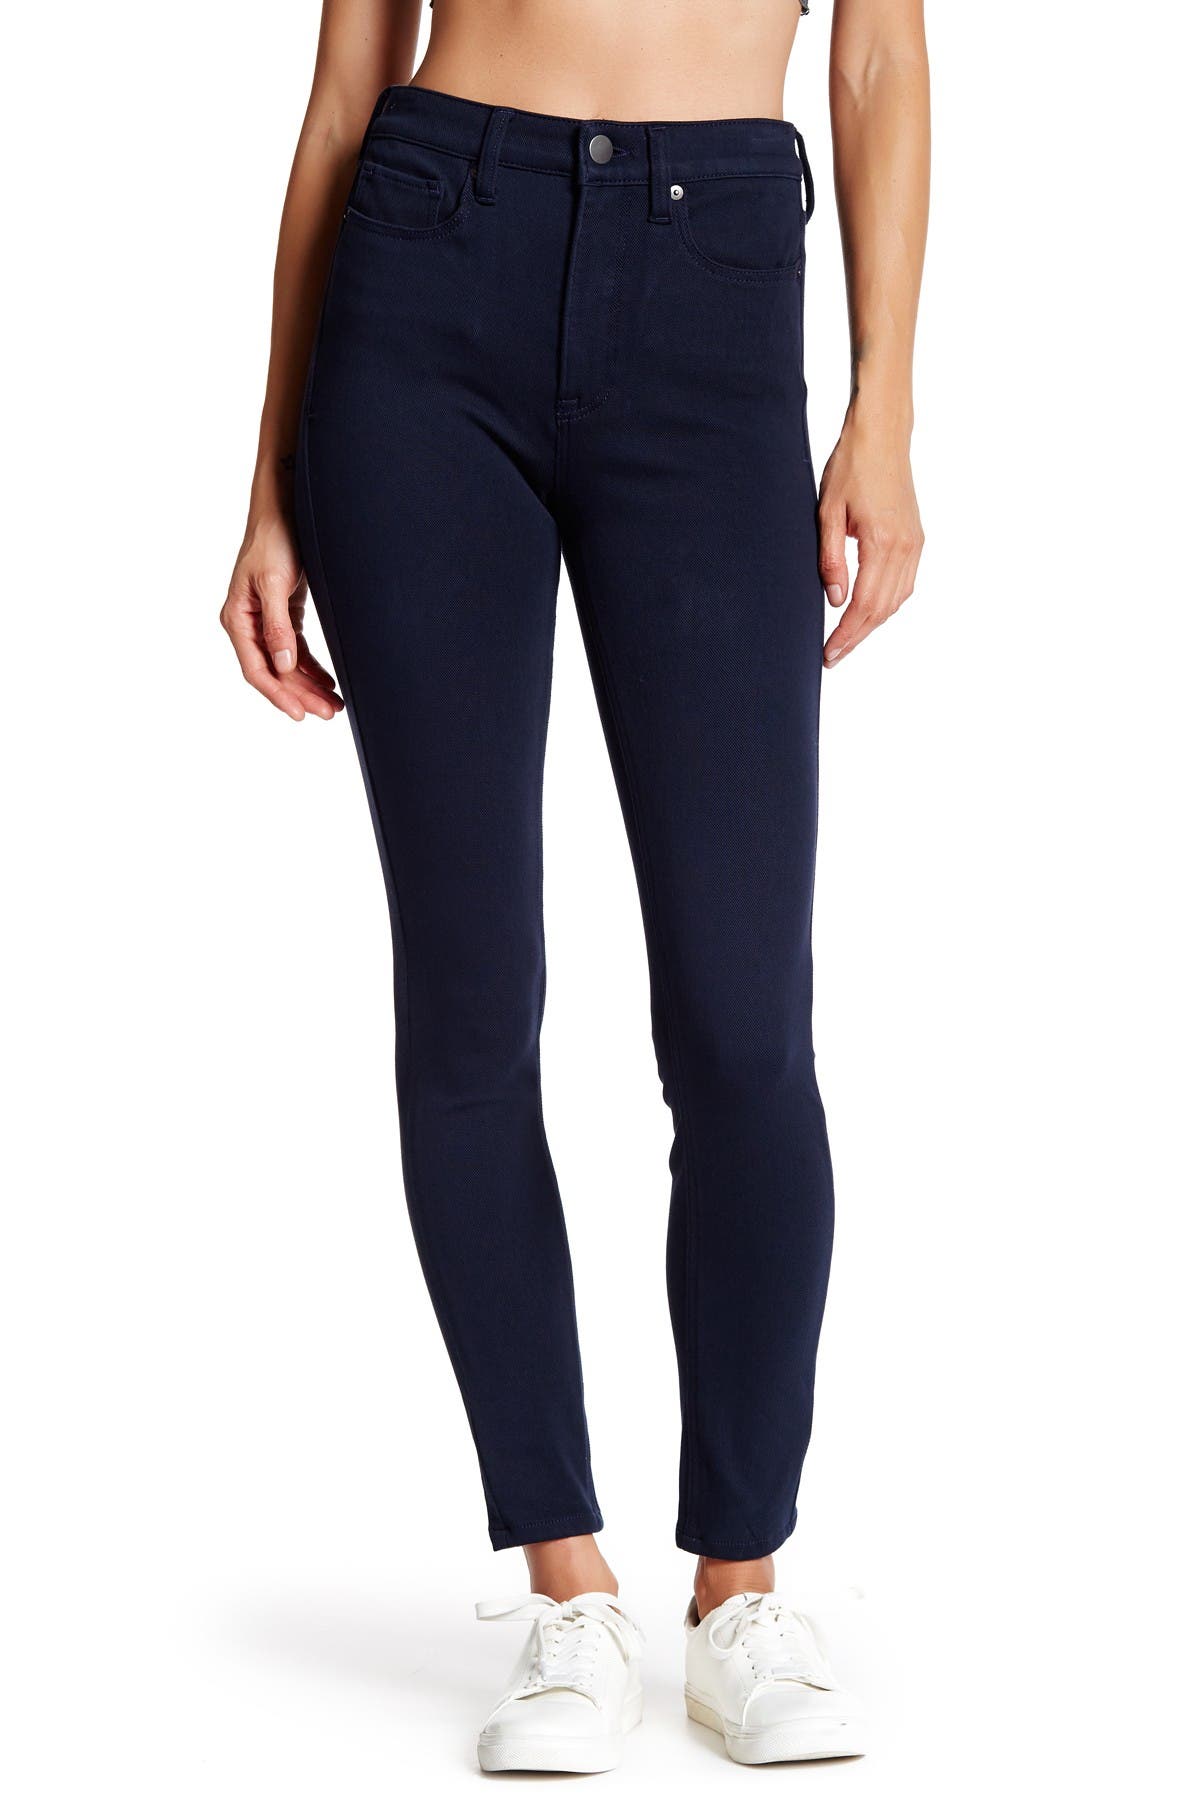 high waisted spanx jeans